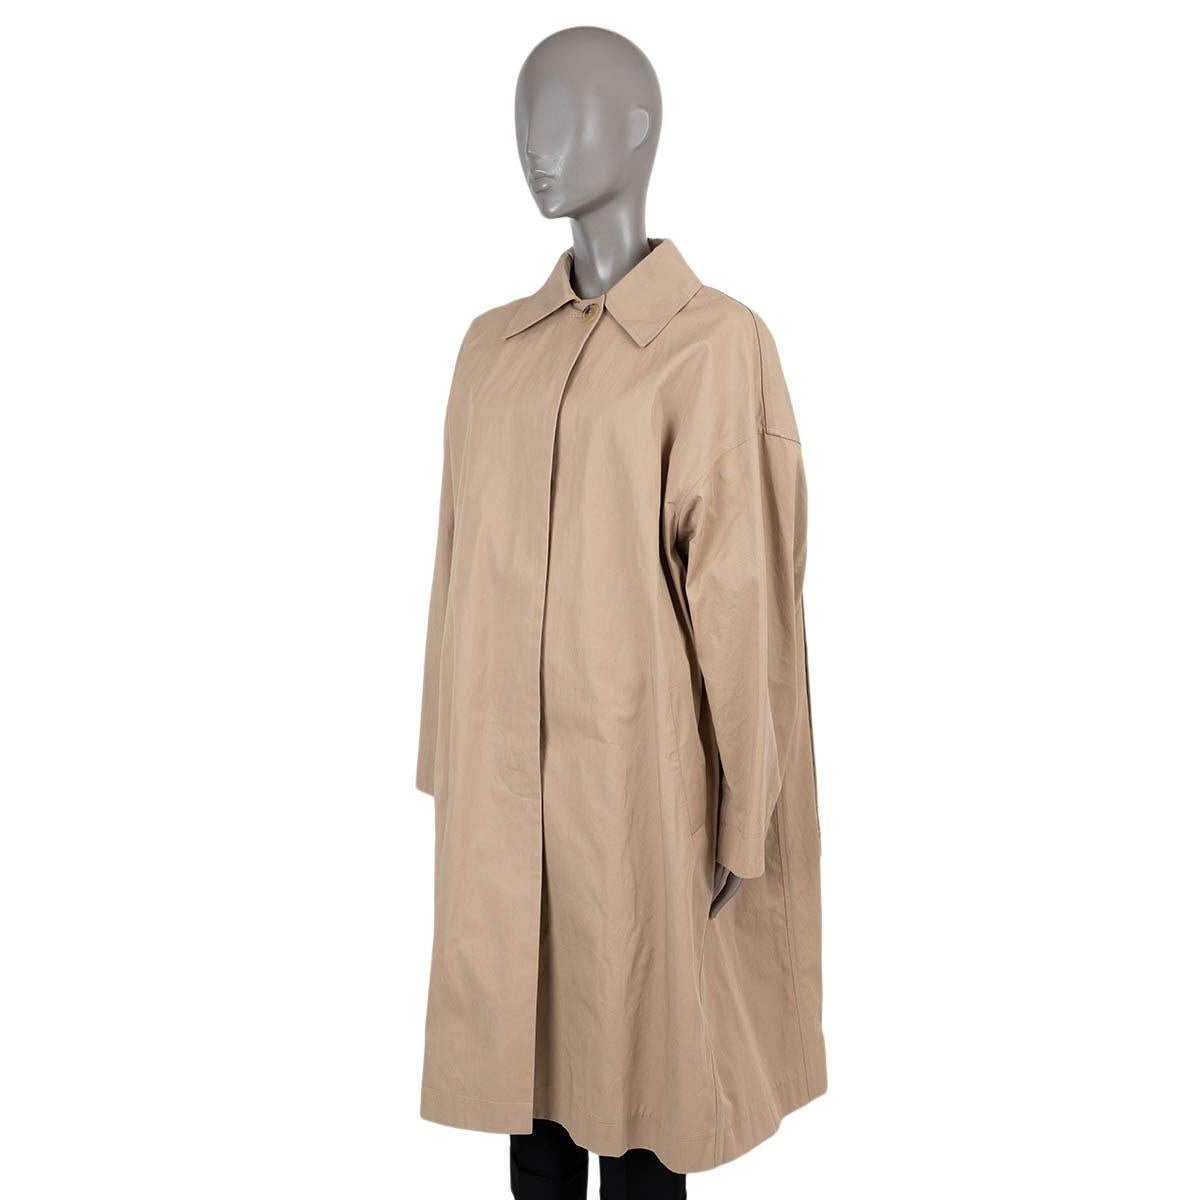 100% authentic Celine by Phoebe Philo oversized rain coat in beige gaberdine cotton (100%). Features dropped shoulders, wide sleeves, point collar, two slant pockets at the waist and a storm flap with D-ring strap and square pleat on the back.